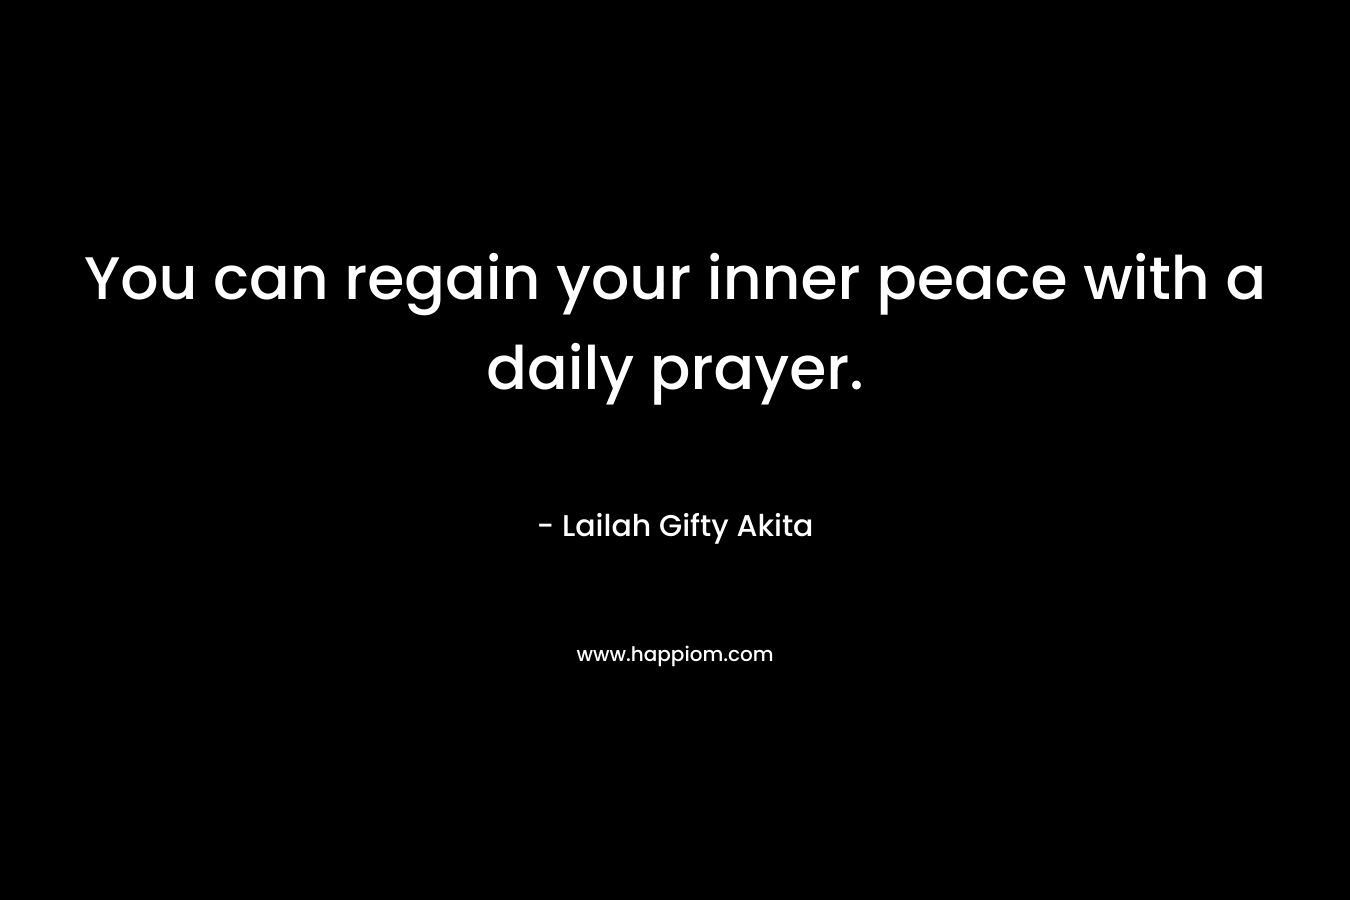 You can regain your inner peace with a daily prayer. – Lailah Gifty Akita